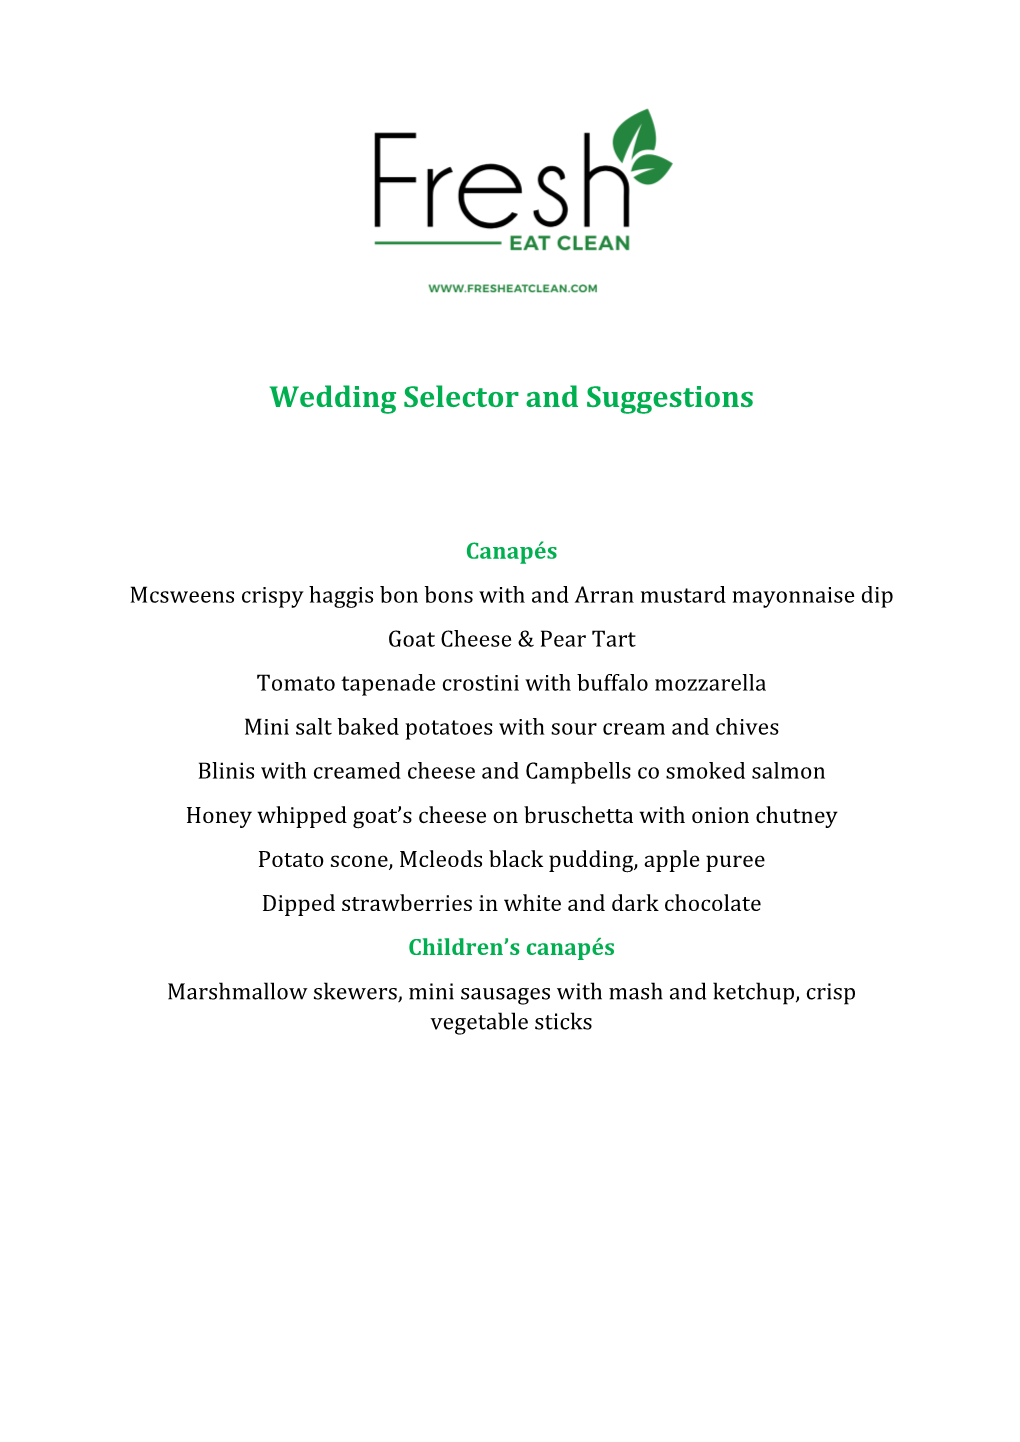 Wedding Selector and Suggestions